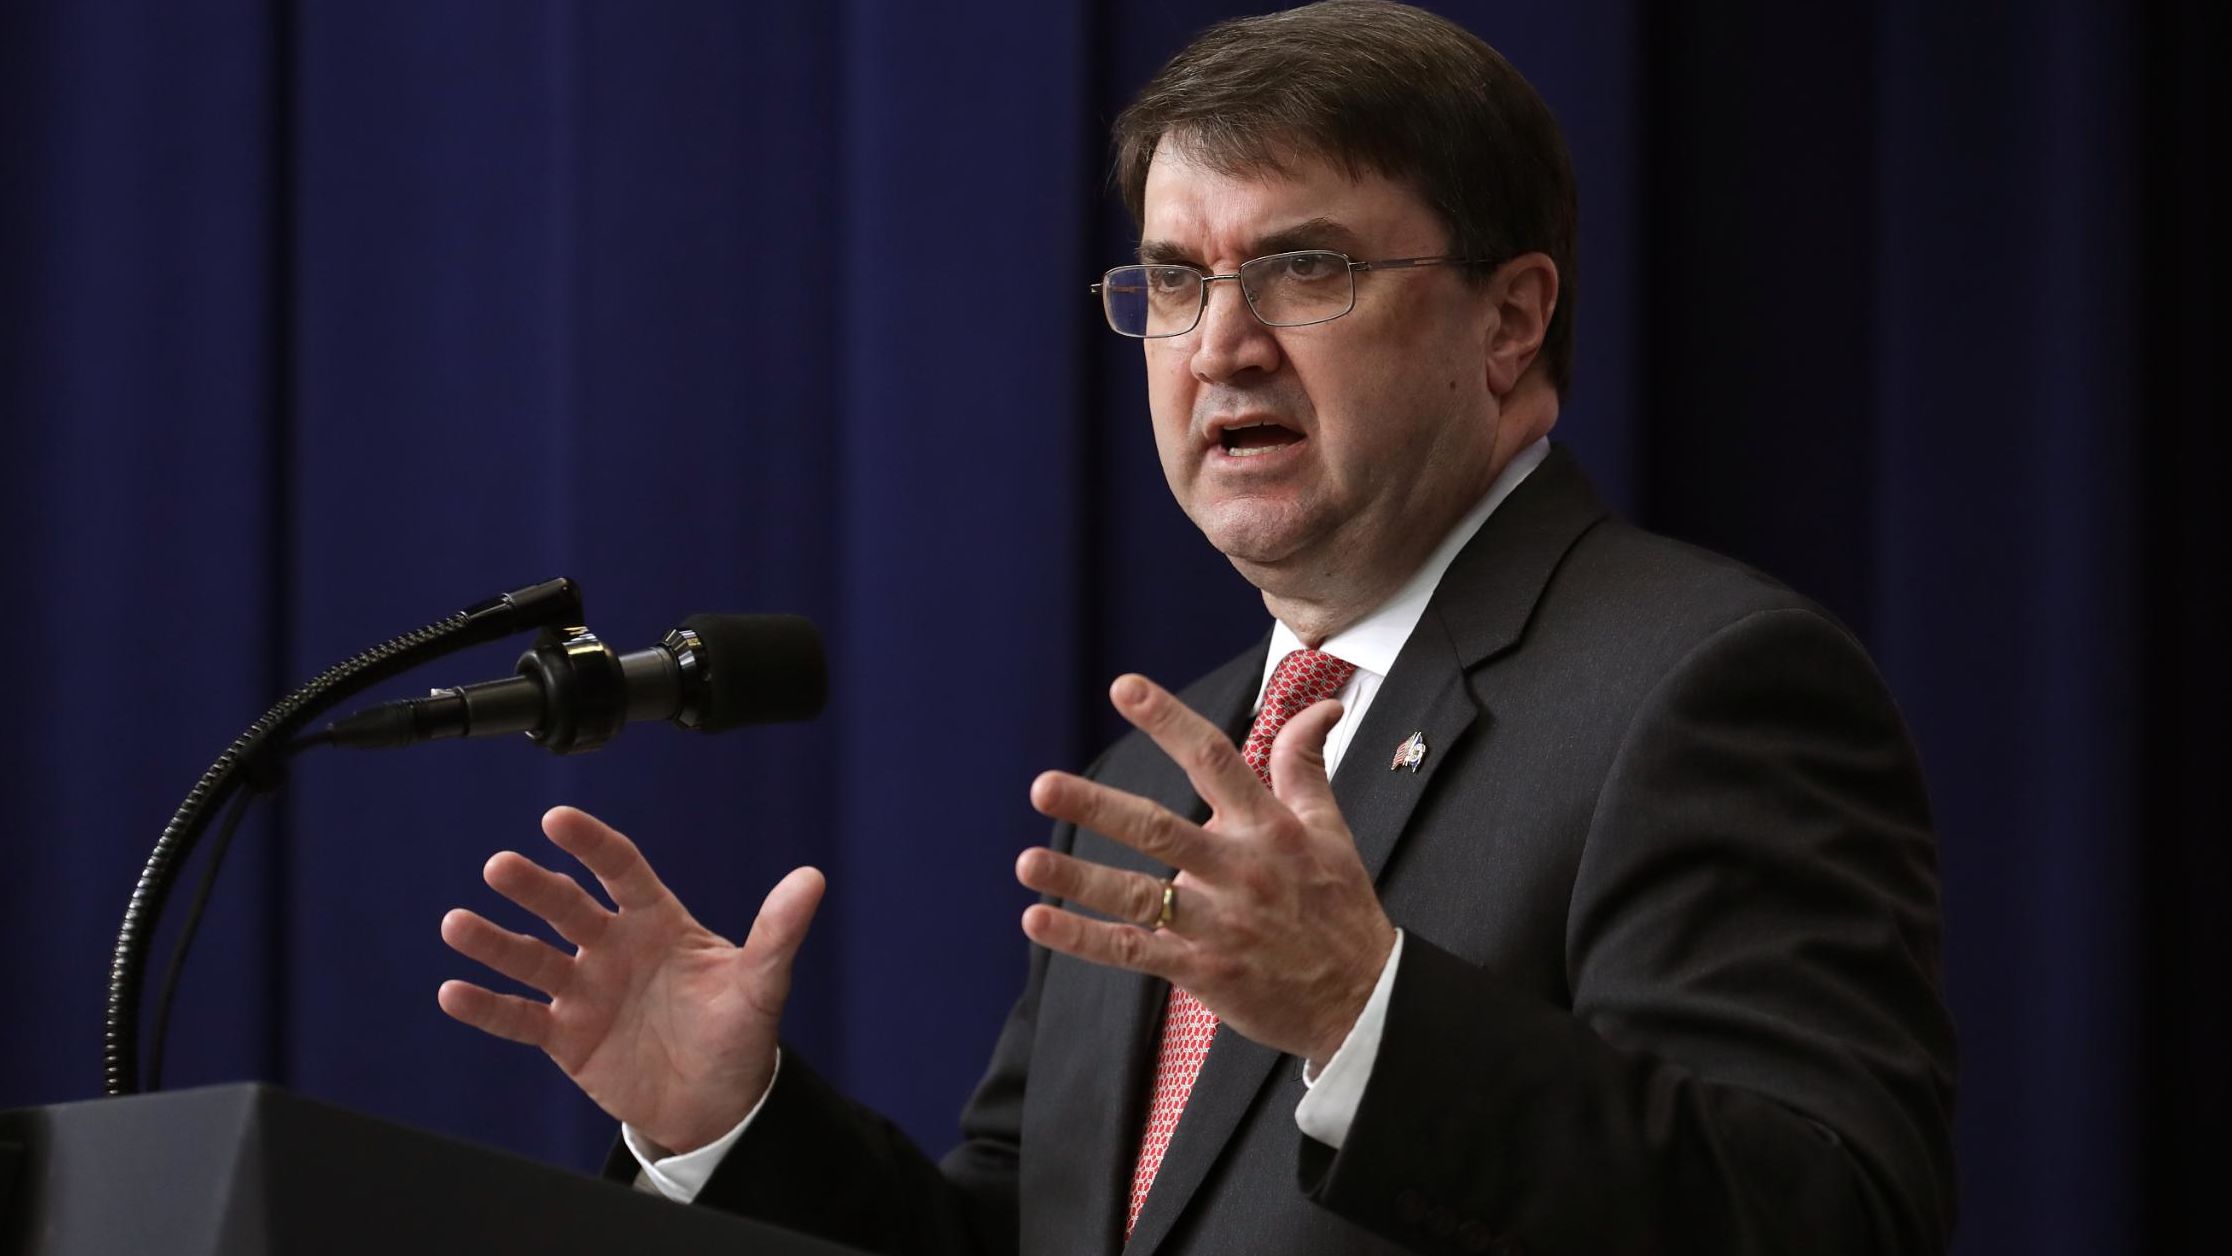 WASHINGTON, DC - NOVEMBER 15: U.S. Veterans Affairs Secretary Robert Wilkie delivers remarks during a conference with federal, state and local veterans leaders in the Eisenhower Executive Office Building November 15, 2018 in Washington, DC. During the conference, President Donald Trump listed all of his administration's accomplishments for veterans and promised the invited guests there would be more to come. (Photo by Chip Somodevilla/Getty Images)